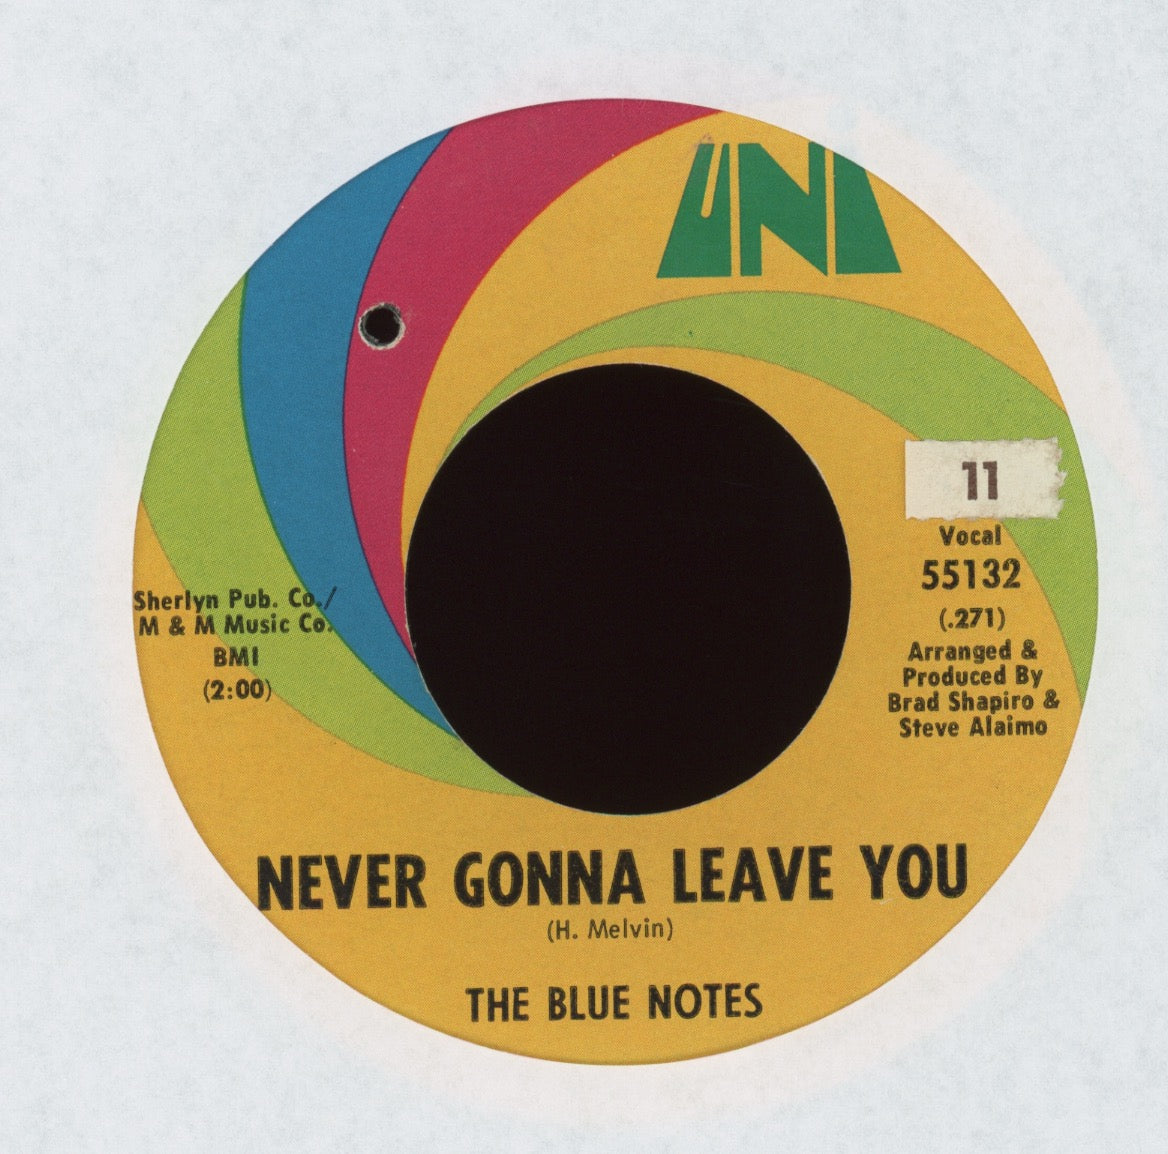 The Blue Notes - Hot Chills And Cold Thrills on Uni